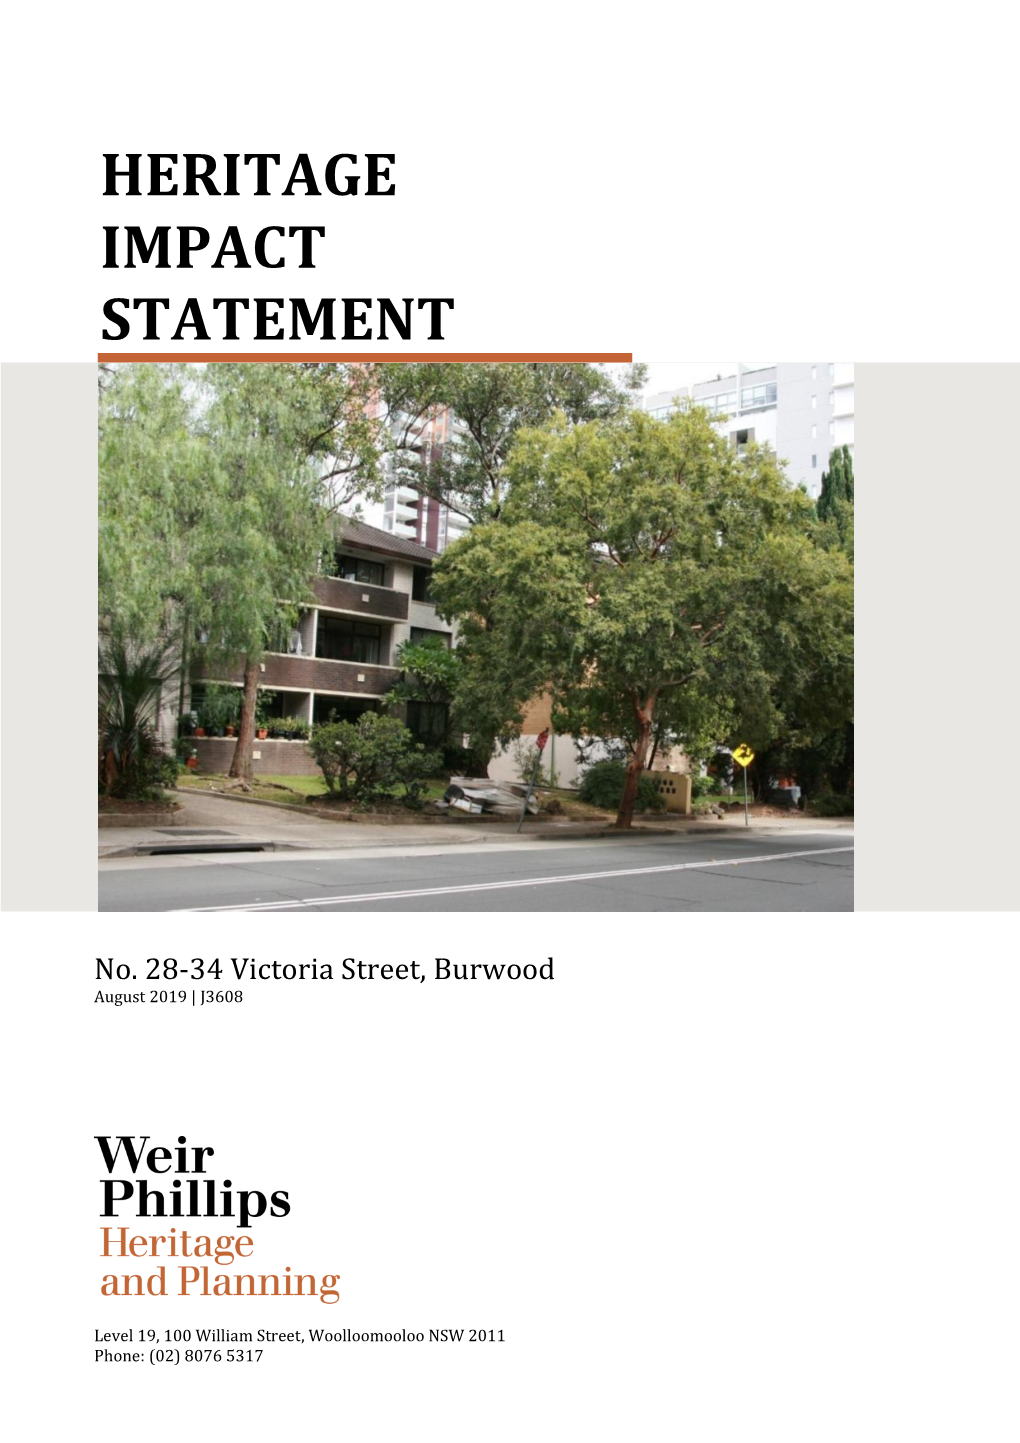 Heritage Impact Statement (HIS) Has Been Prepared in Conjunction with a Development Application for the Demolition of the Existing Buildings at No